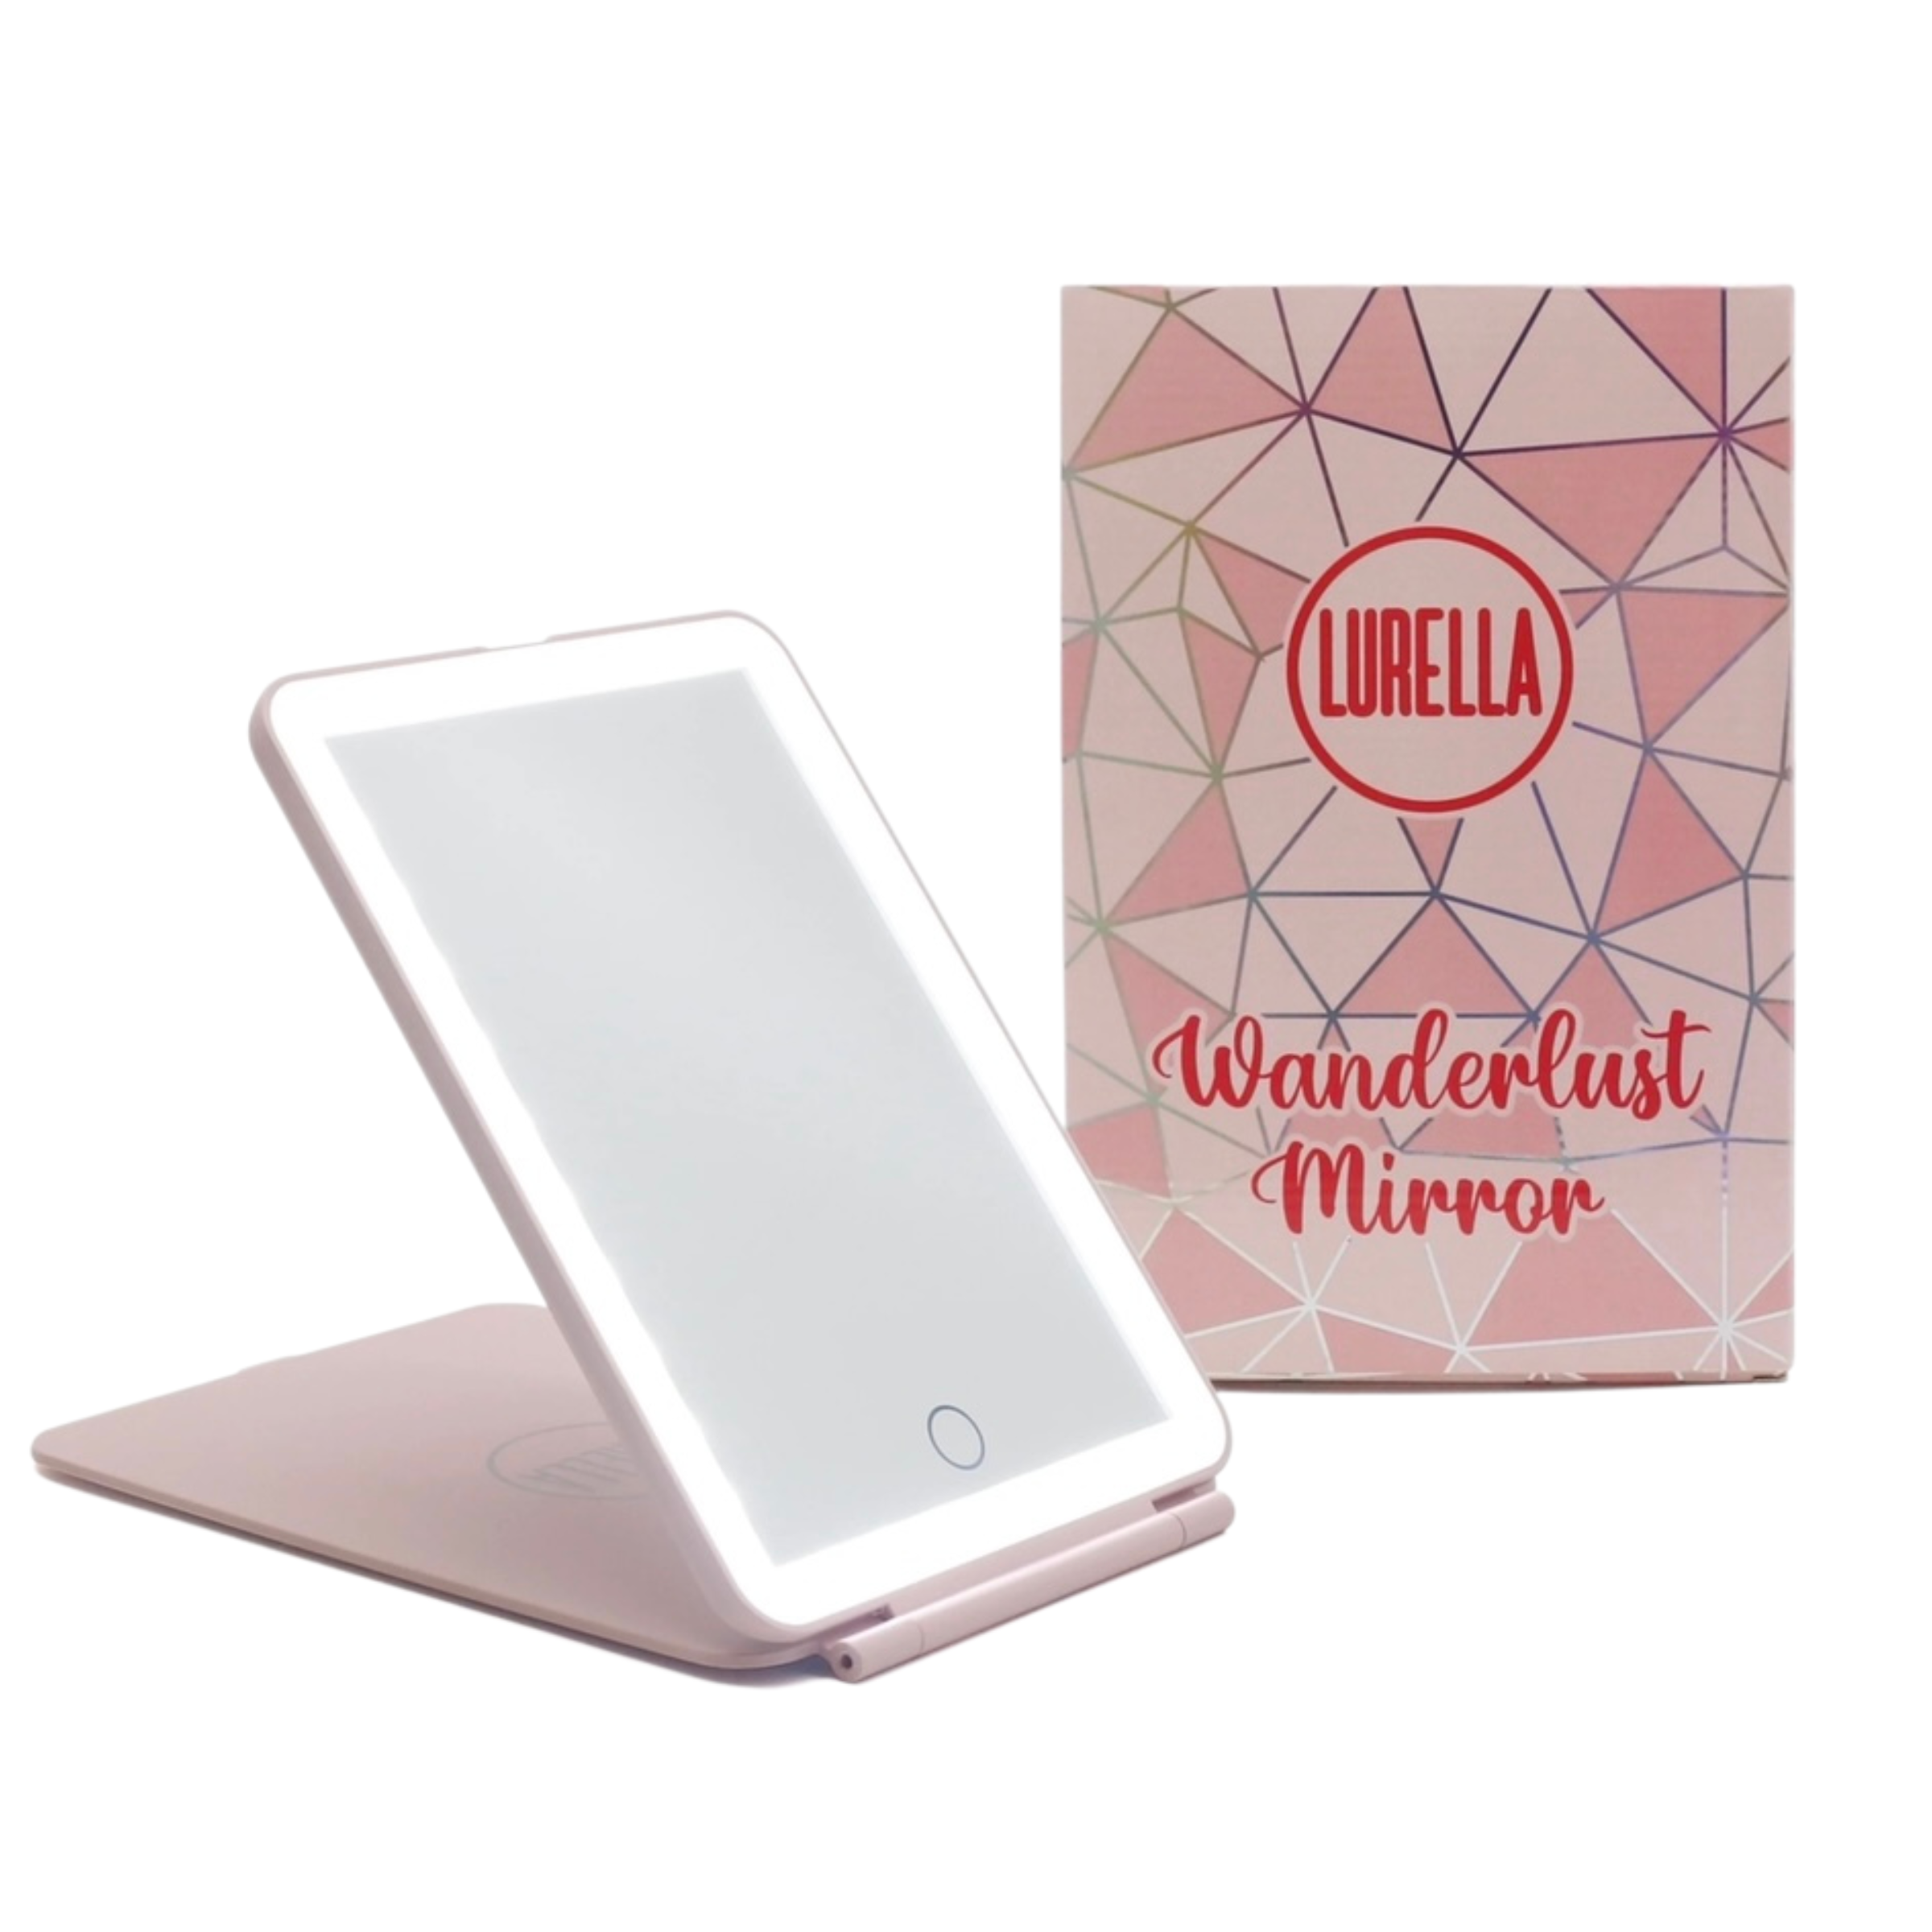 LED Mini Wanderlust Mirror in Light Pink - Giddy Up Glamour Boutique